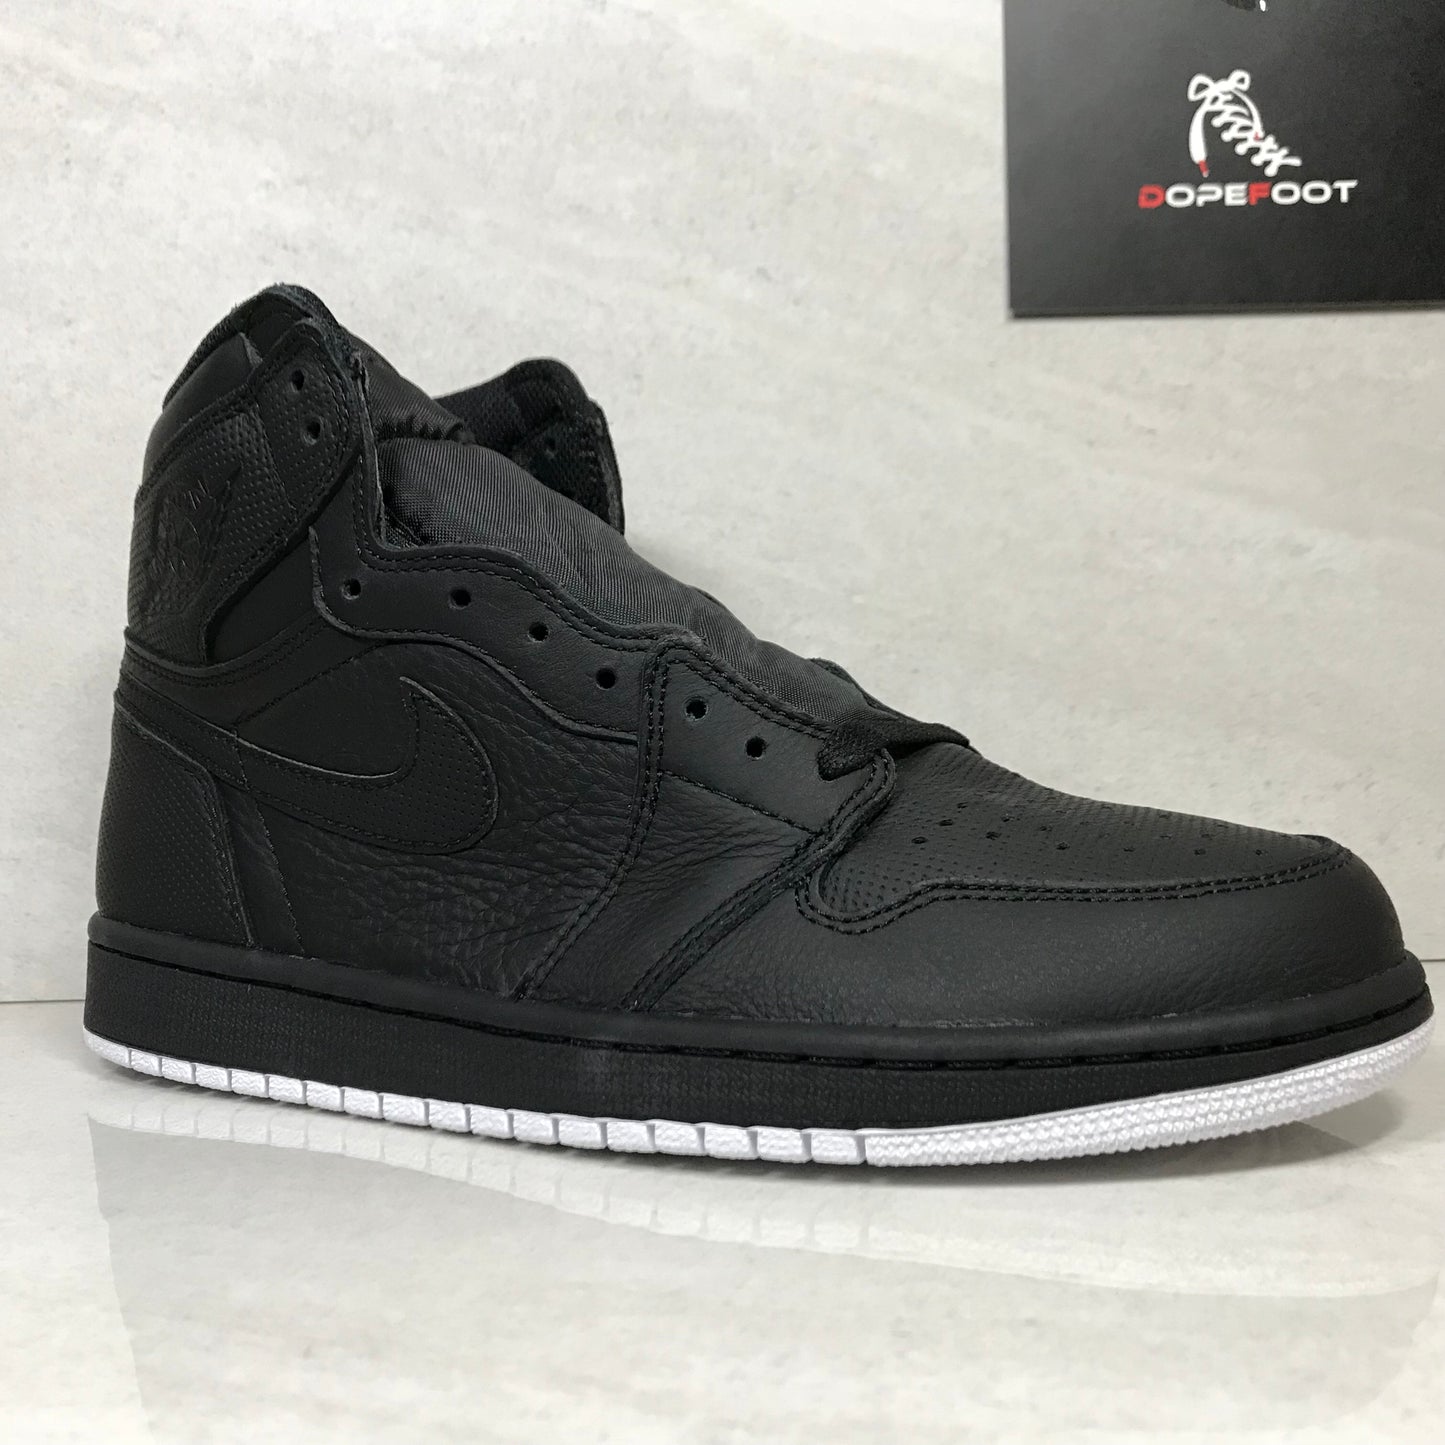 DS Air Jordan 1 I High OG Black/White Perforated Size 7/Size 9/9.5/Size 10/10.5/Size 11/Size 16